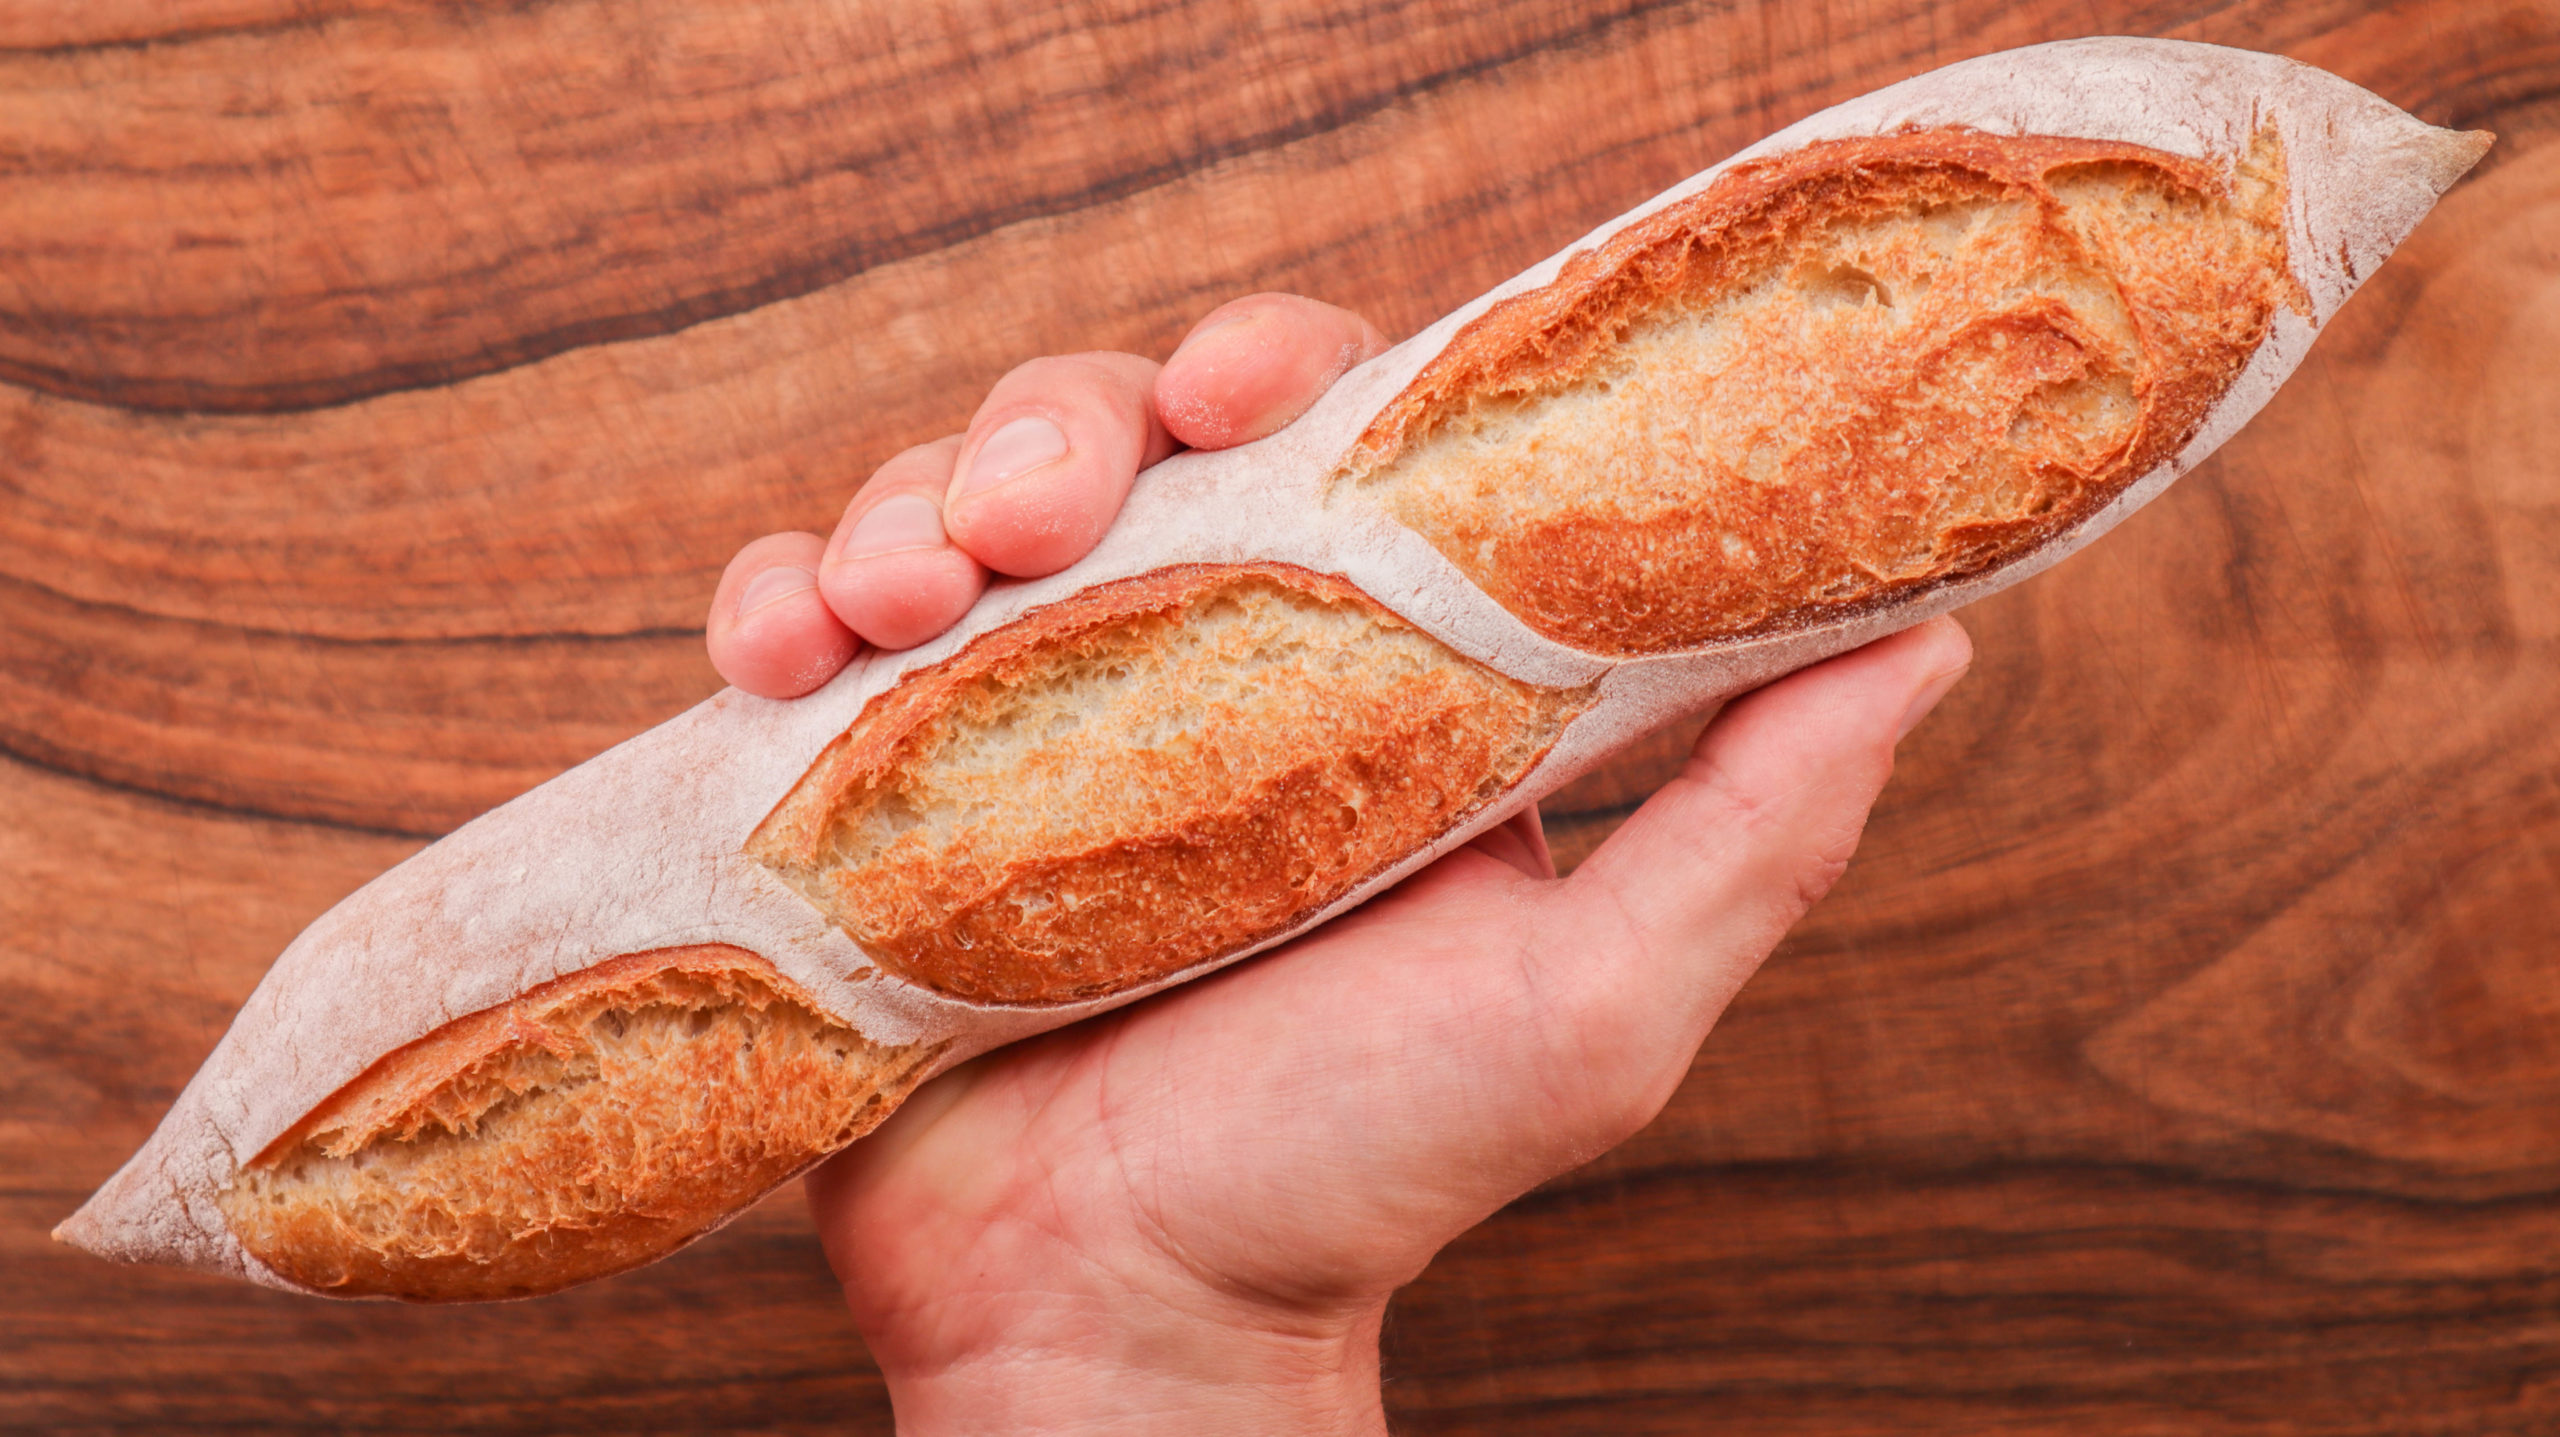 How to Make Beautiful Poolish Baguettes by Hand - ChainBaker